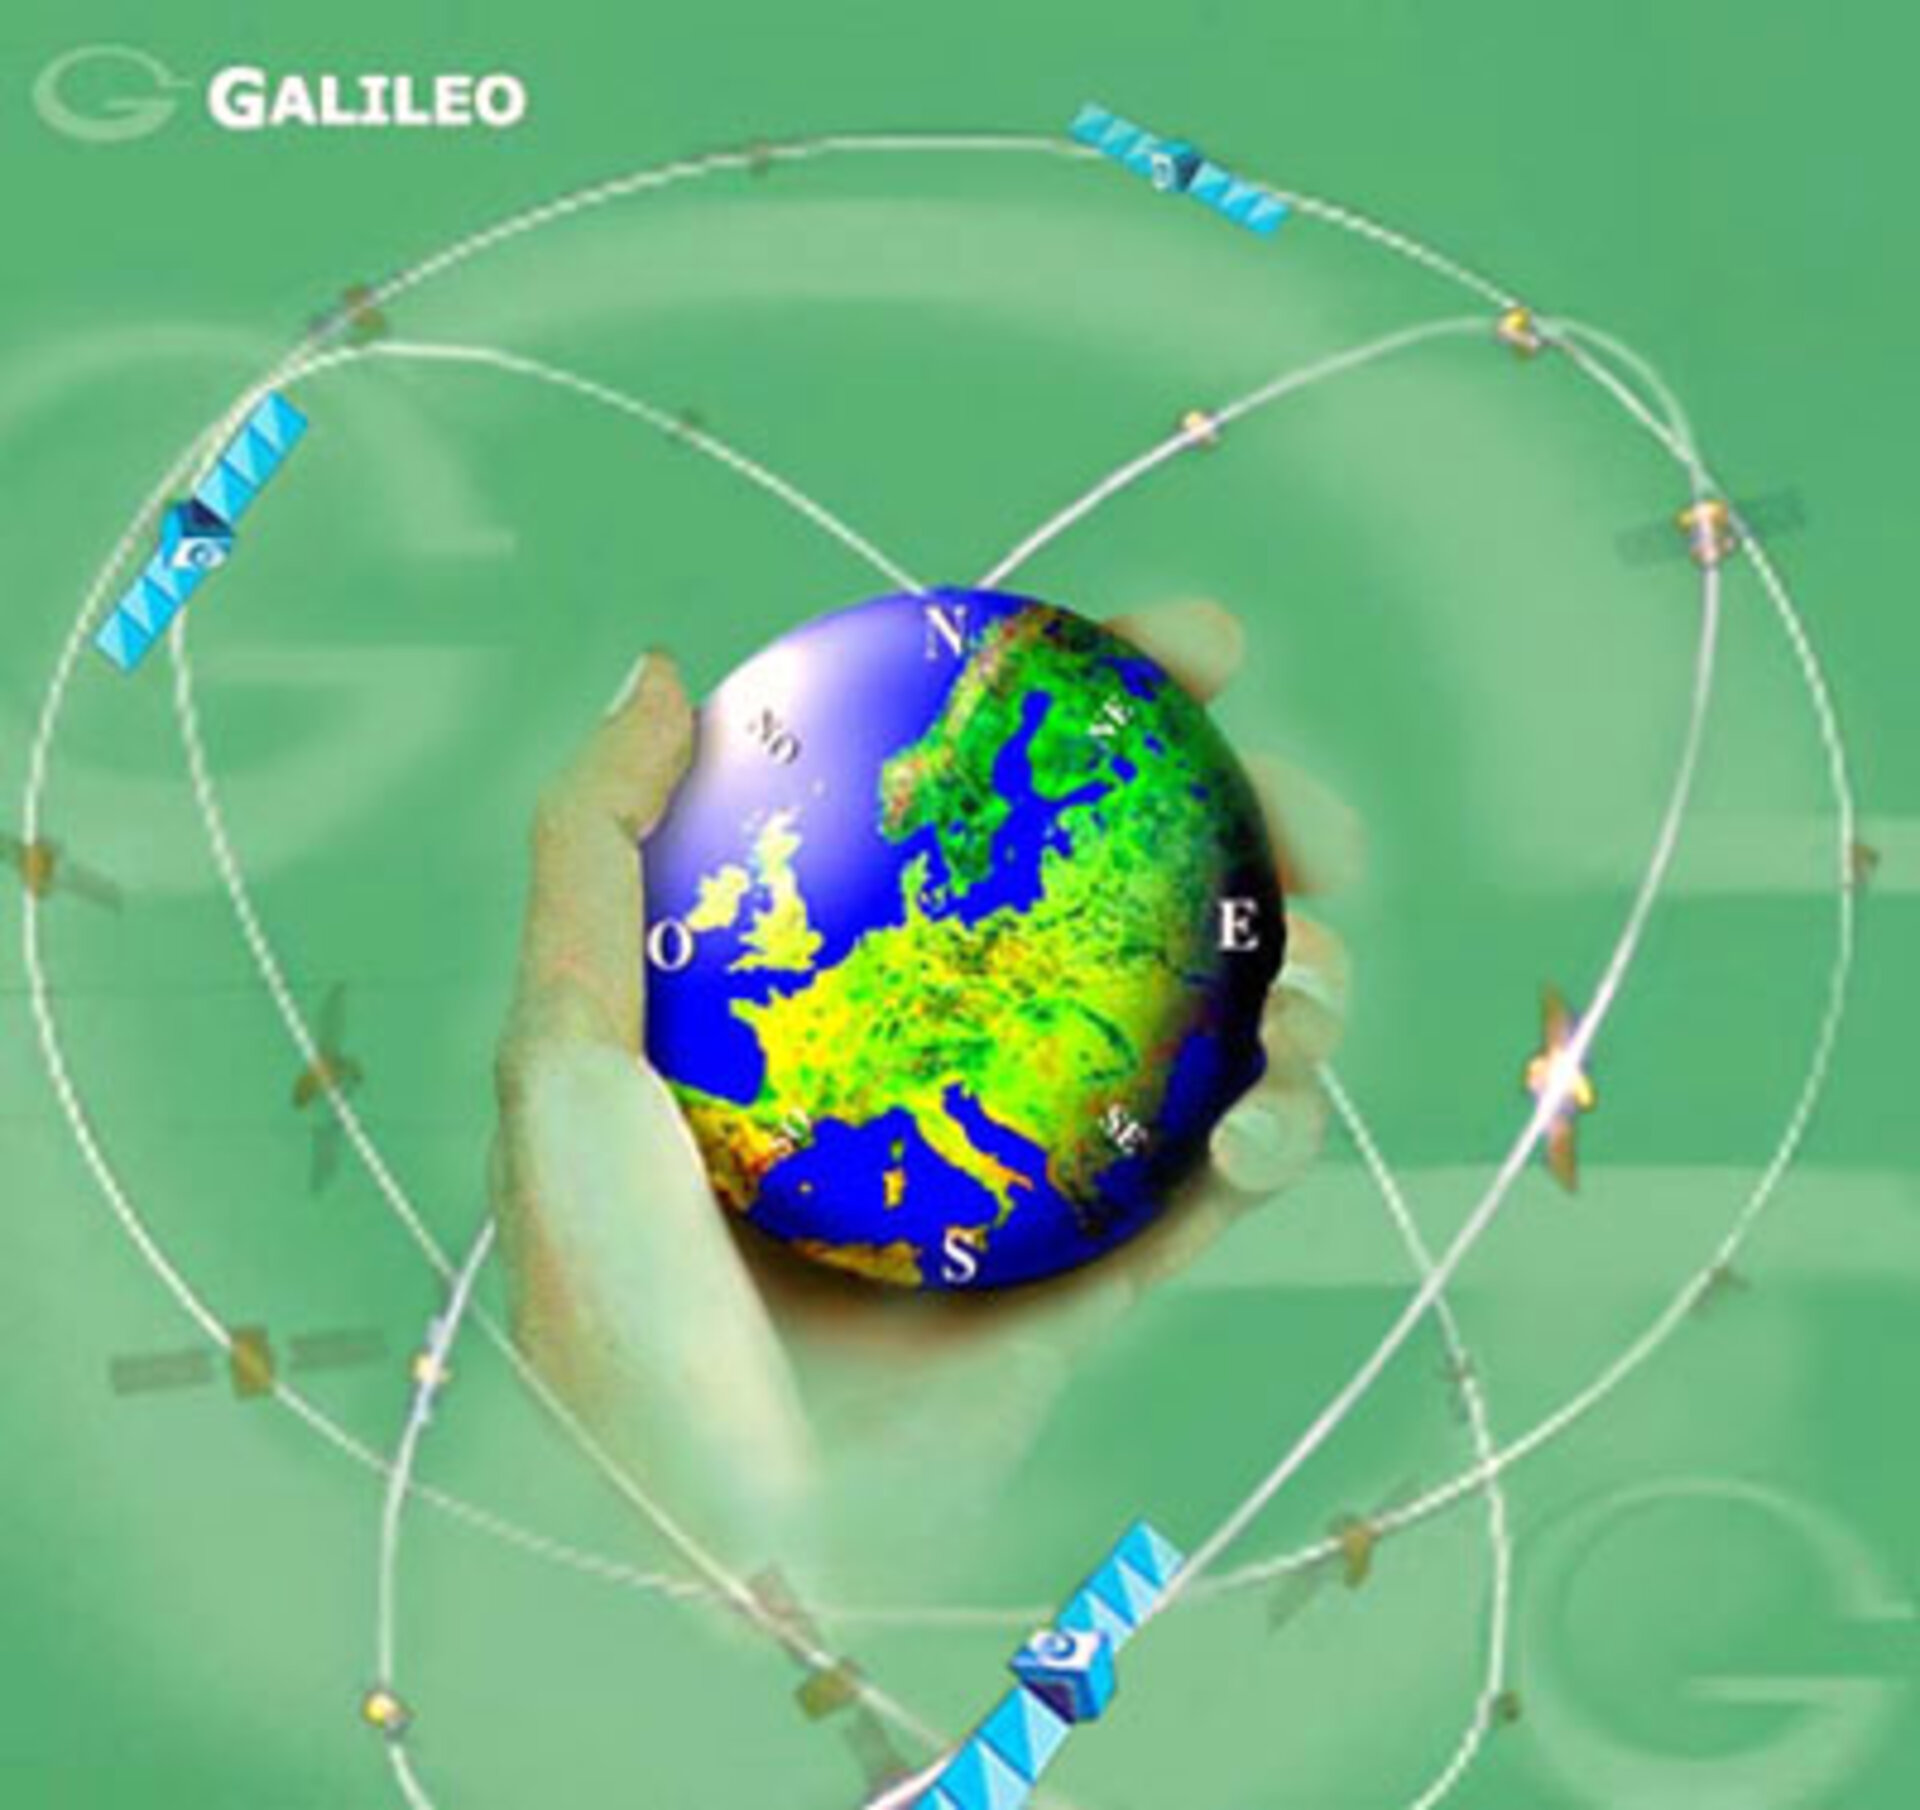 Galileo: unparalleled accuracy and dependability in global positioning